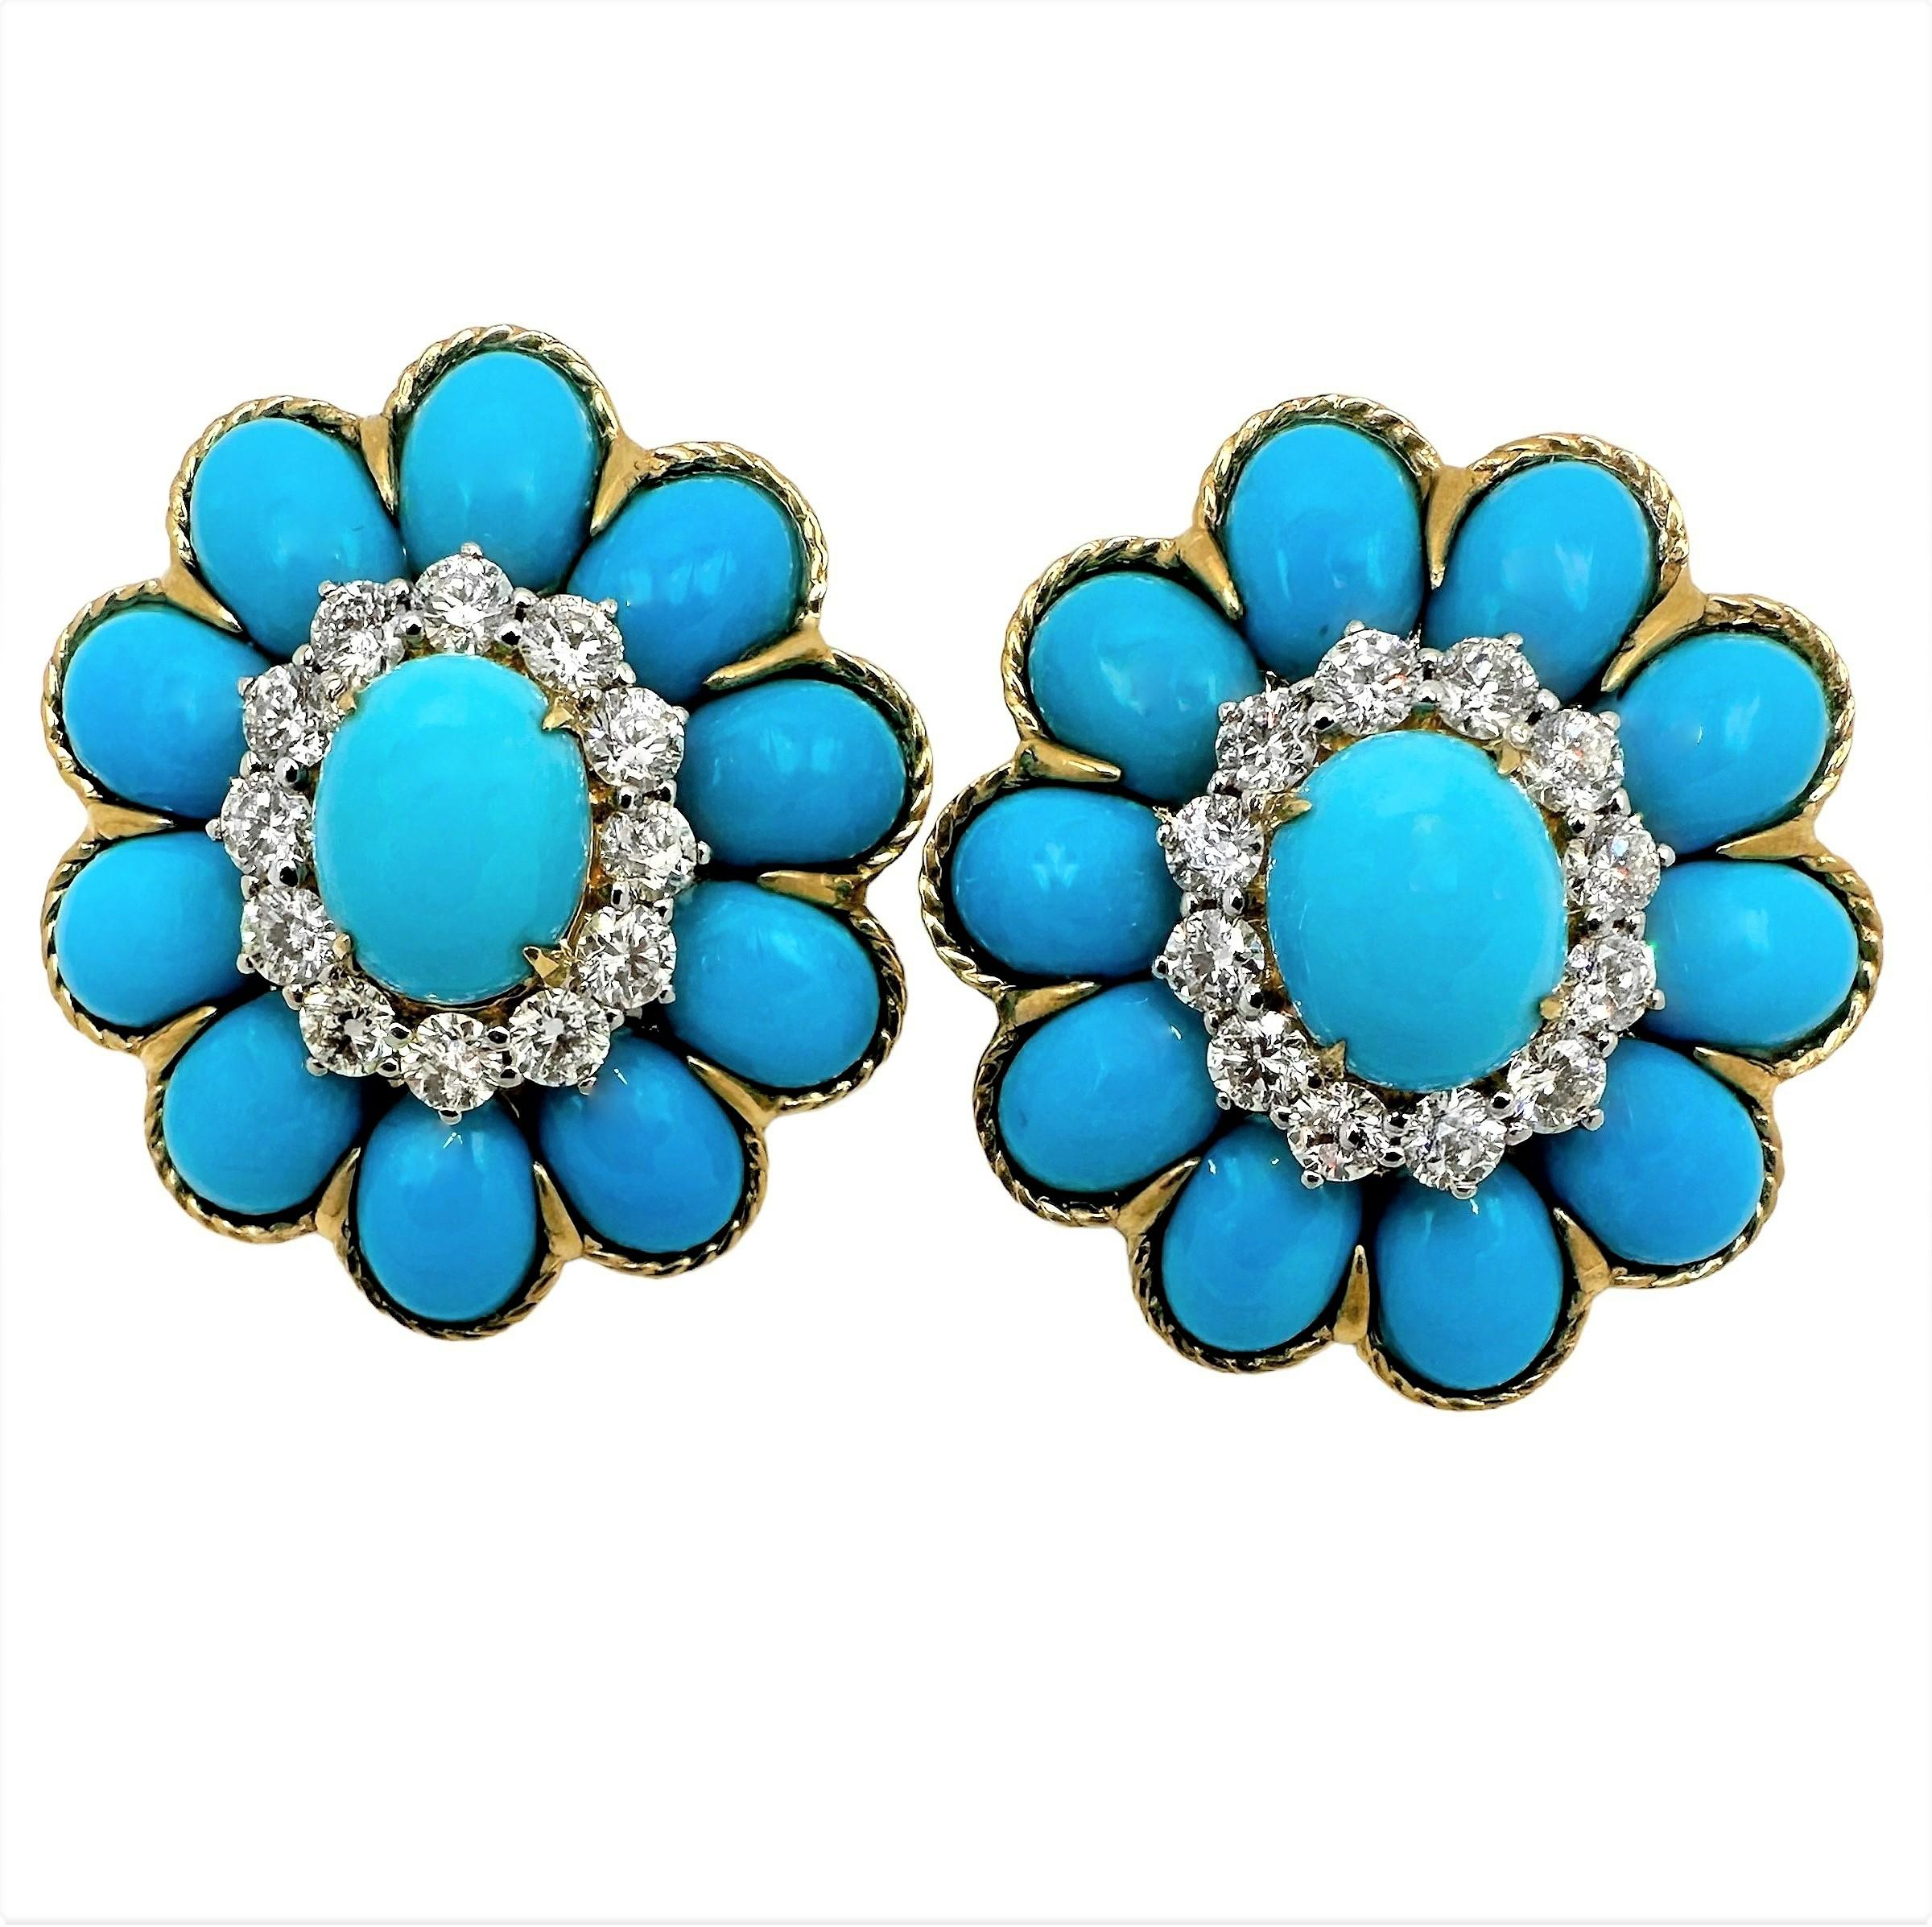 This wonderful pair of Late-20th Century 18K yellow gold cocktail earrings are absolutely perfect in size, quality, and in the generous use of the highest quality materials. Turquoise cabochon centers are surrounded by a total of 24 brilliant cut